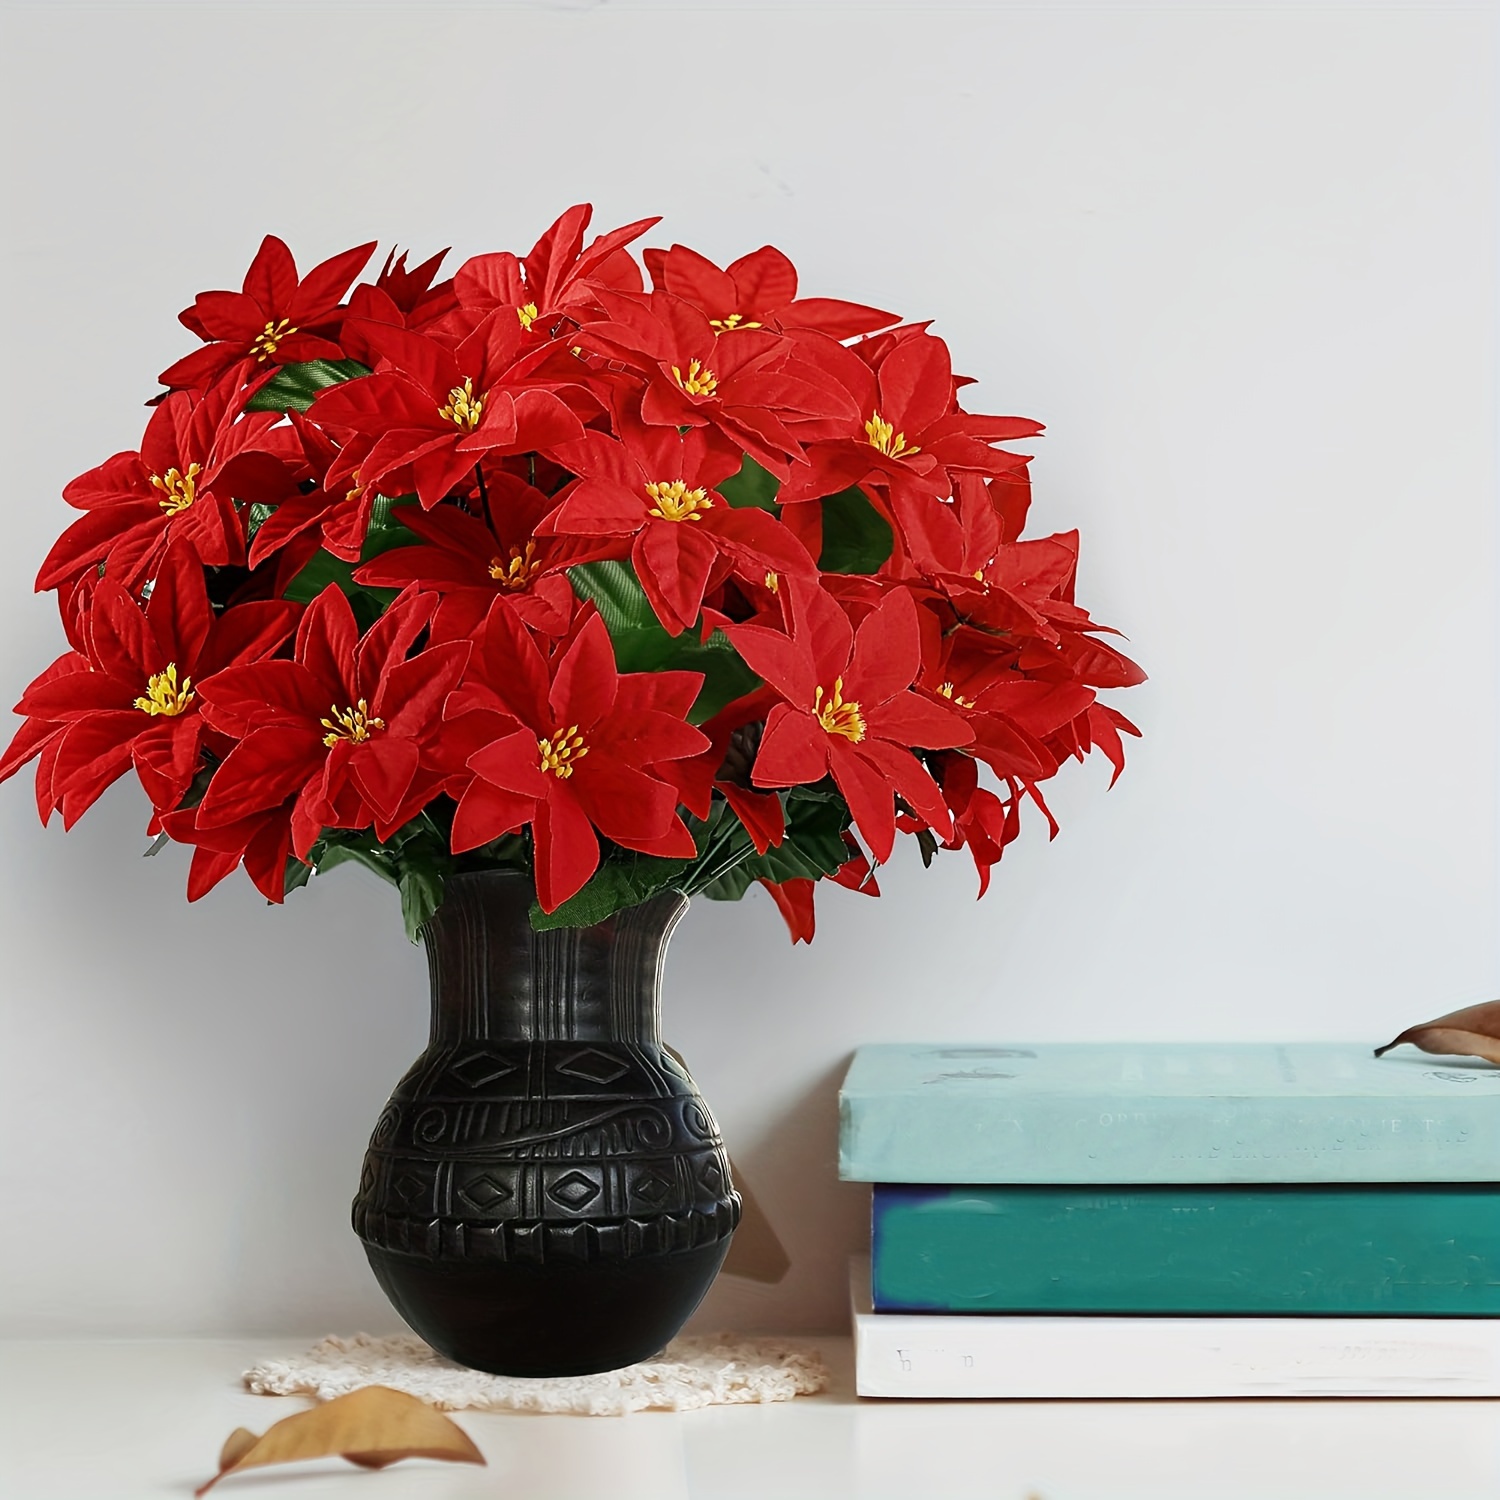 Potted Poinsettias Artificial Christmas Flowers 7 Heads Faux Red Christmas  Poinsettia Plants in Pots Fake Poinsettia Bonsai Christmas Poinsettia